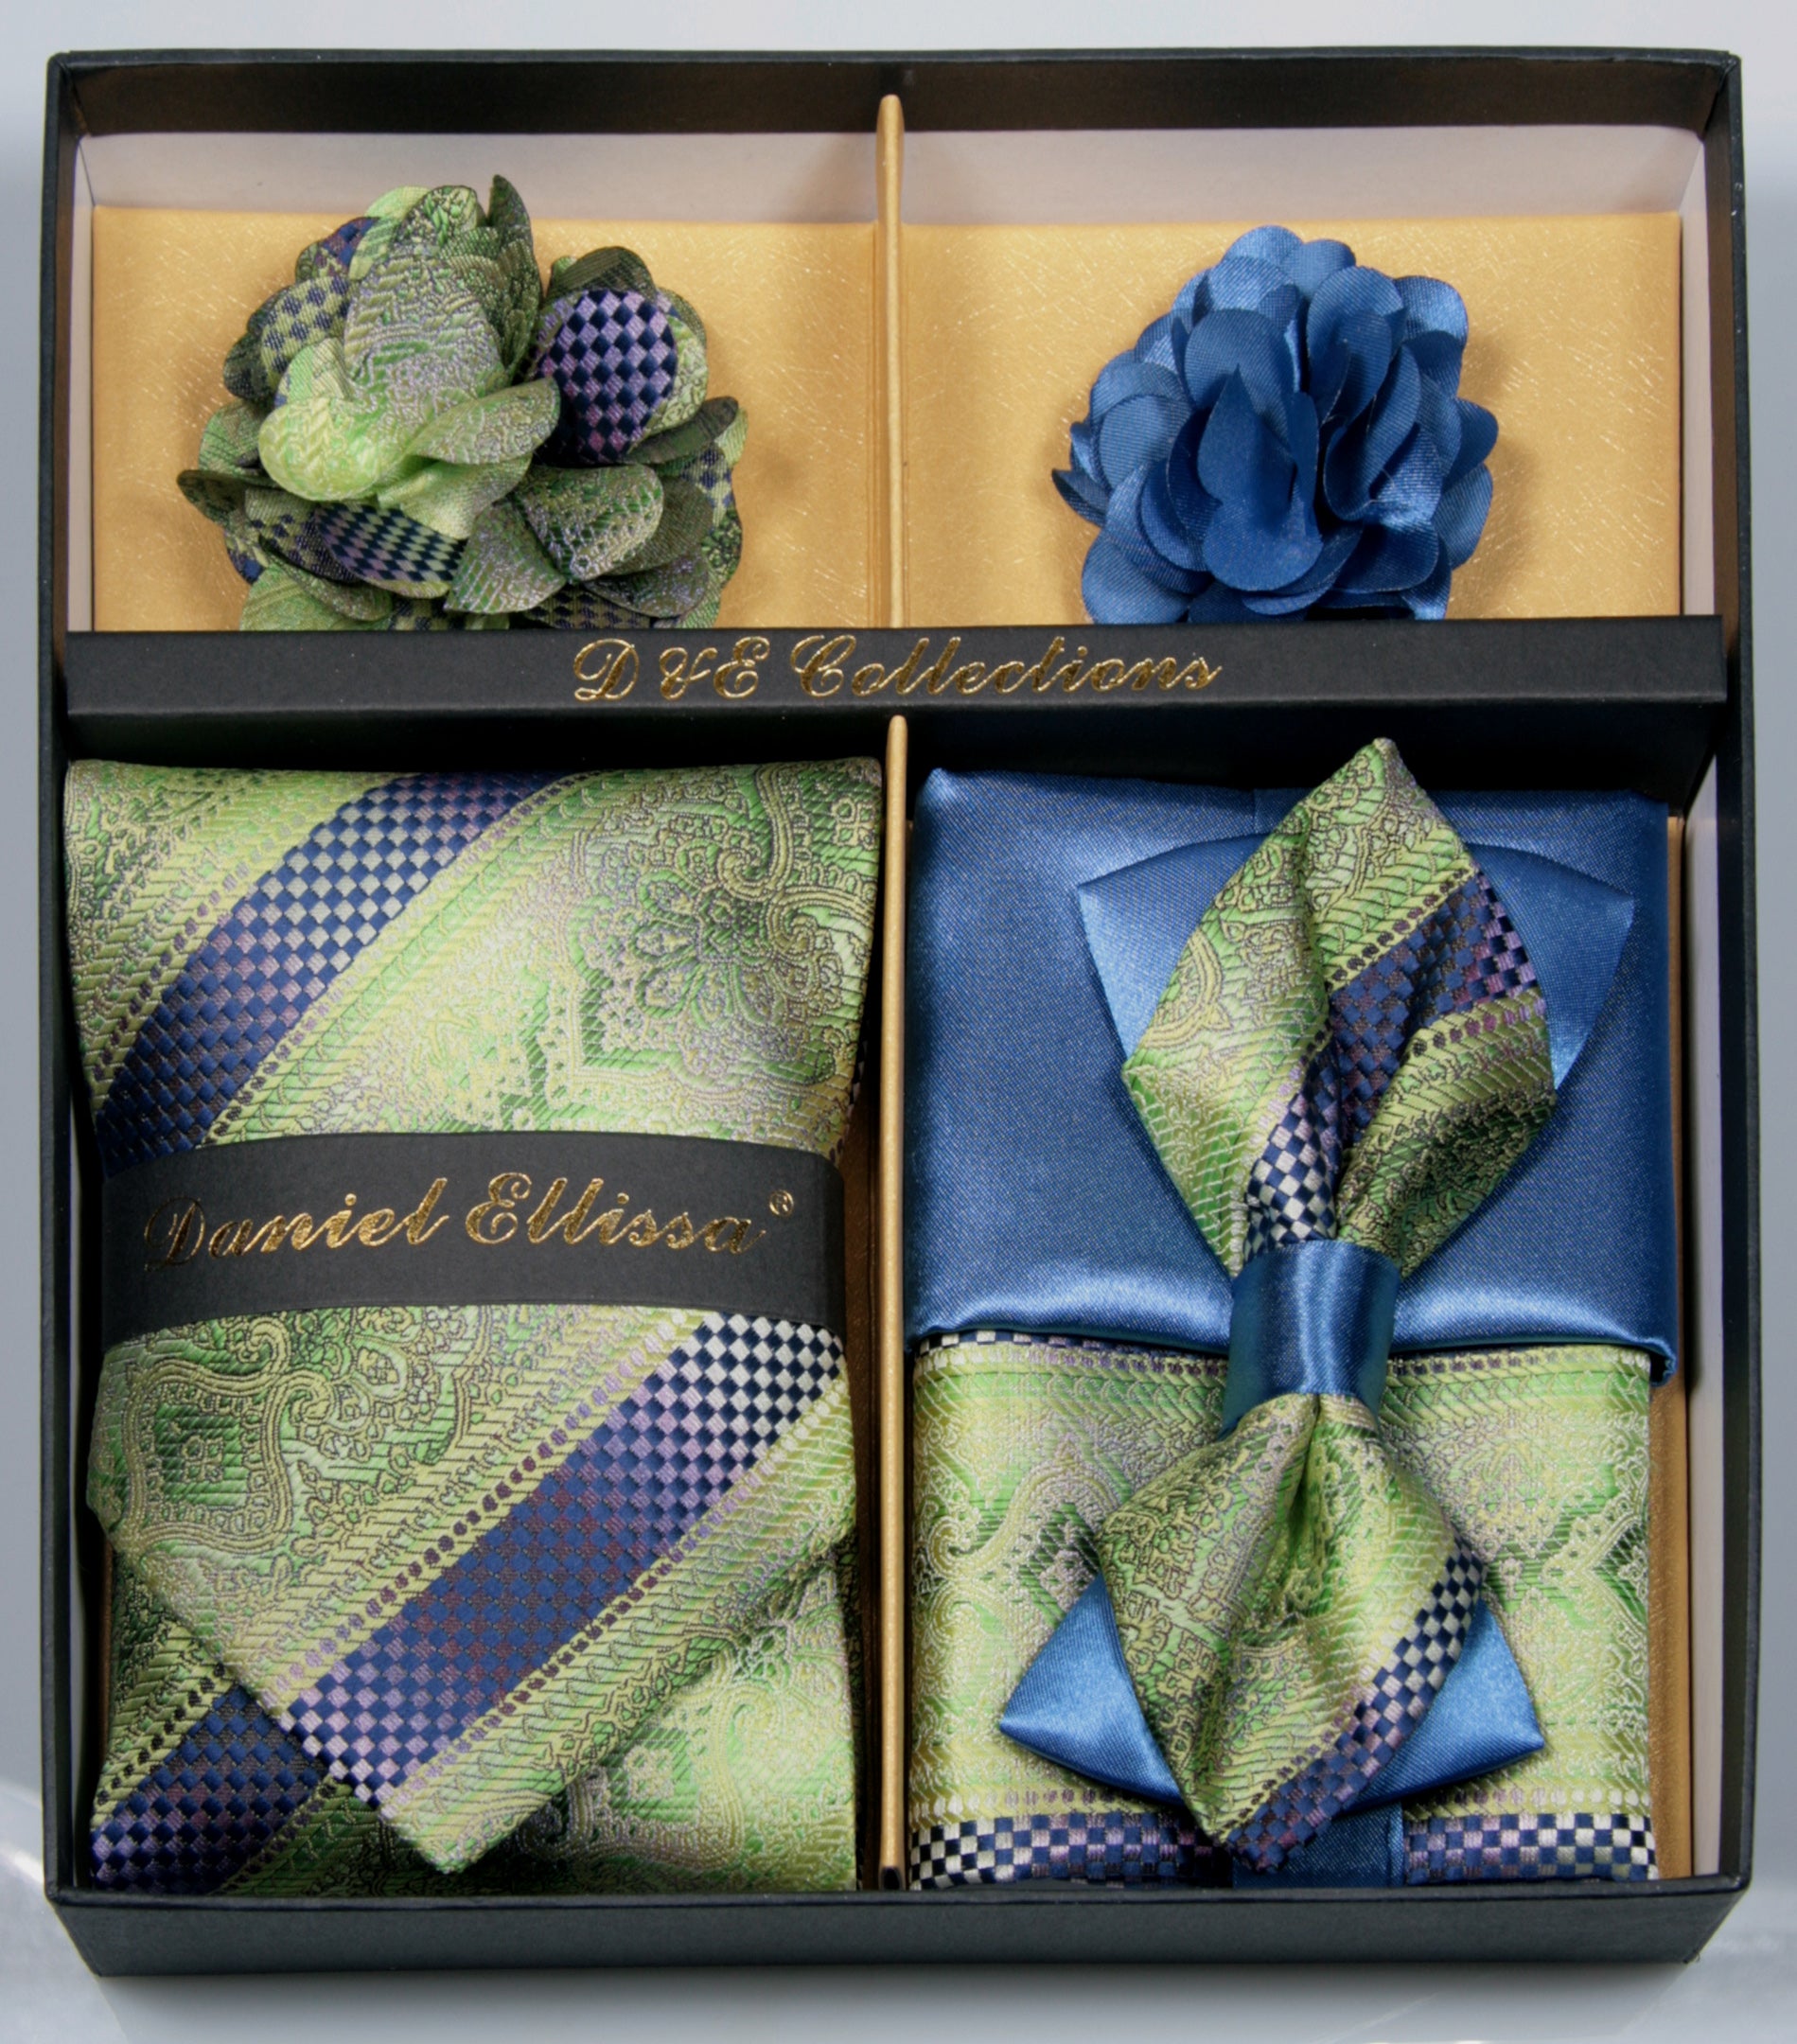 Green and Blue Men's Accessory Collection Box 6 Pieces Set